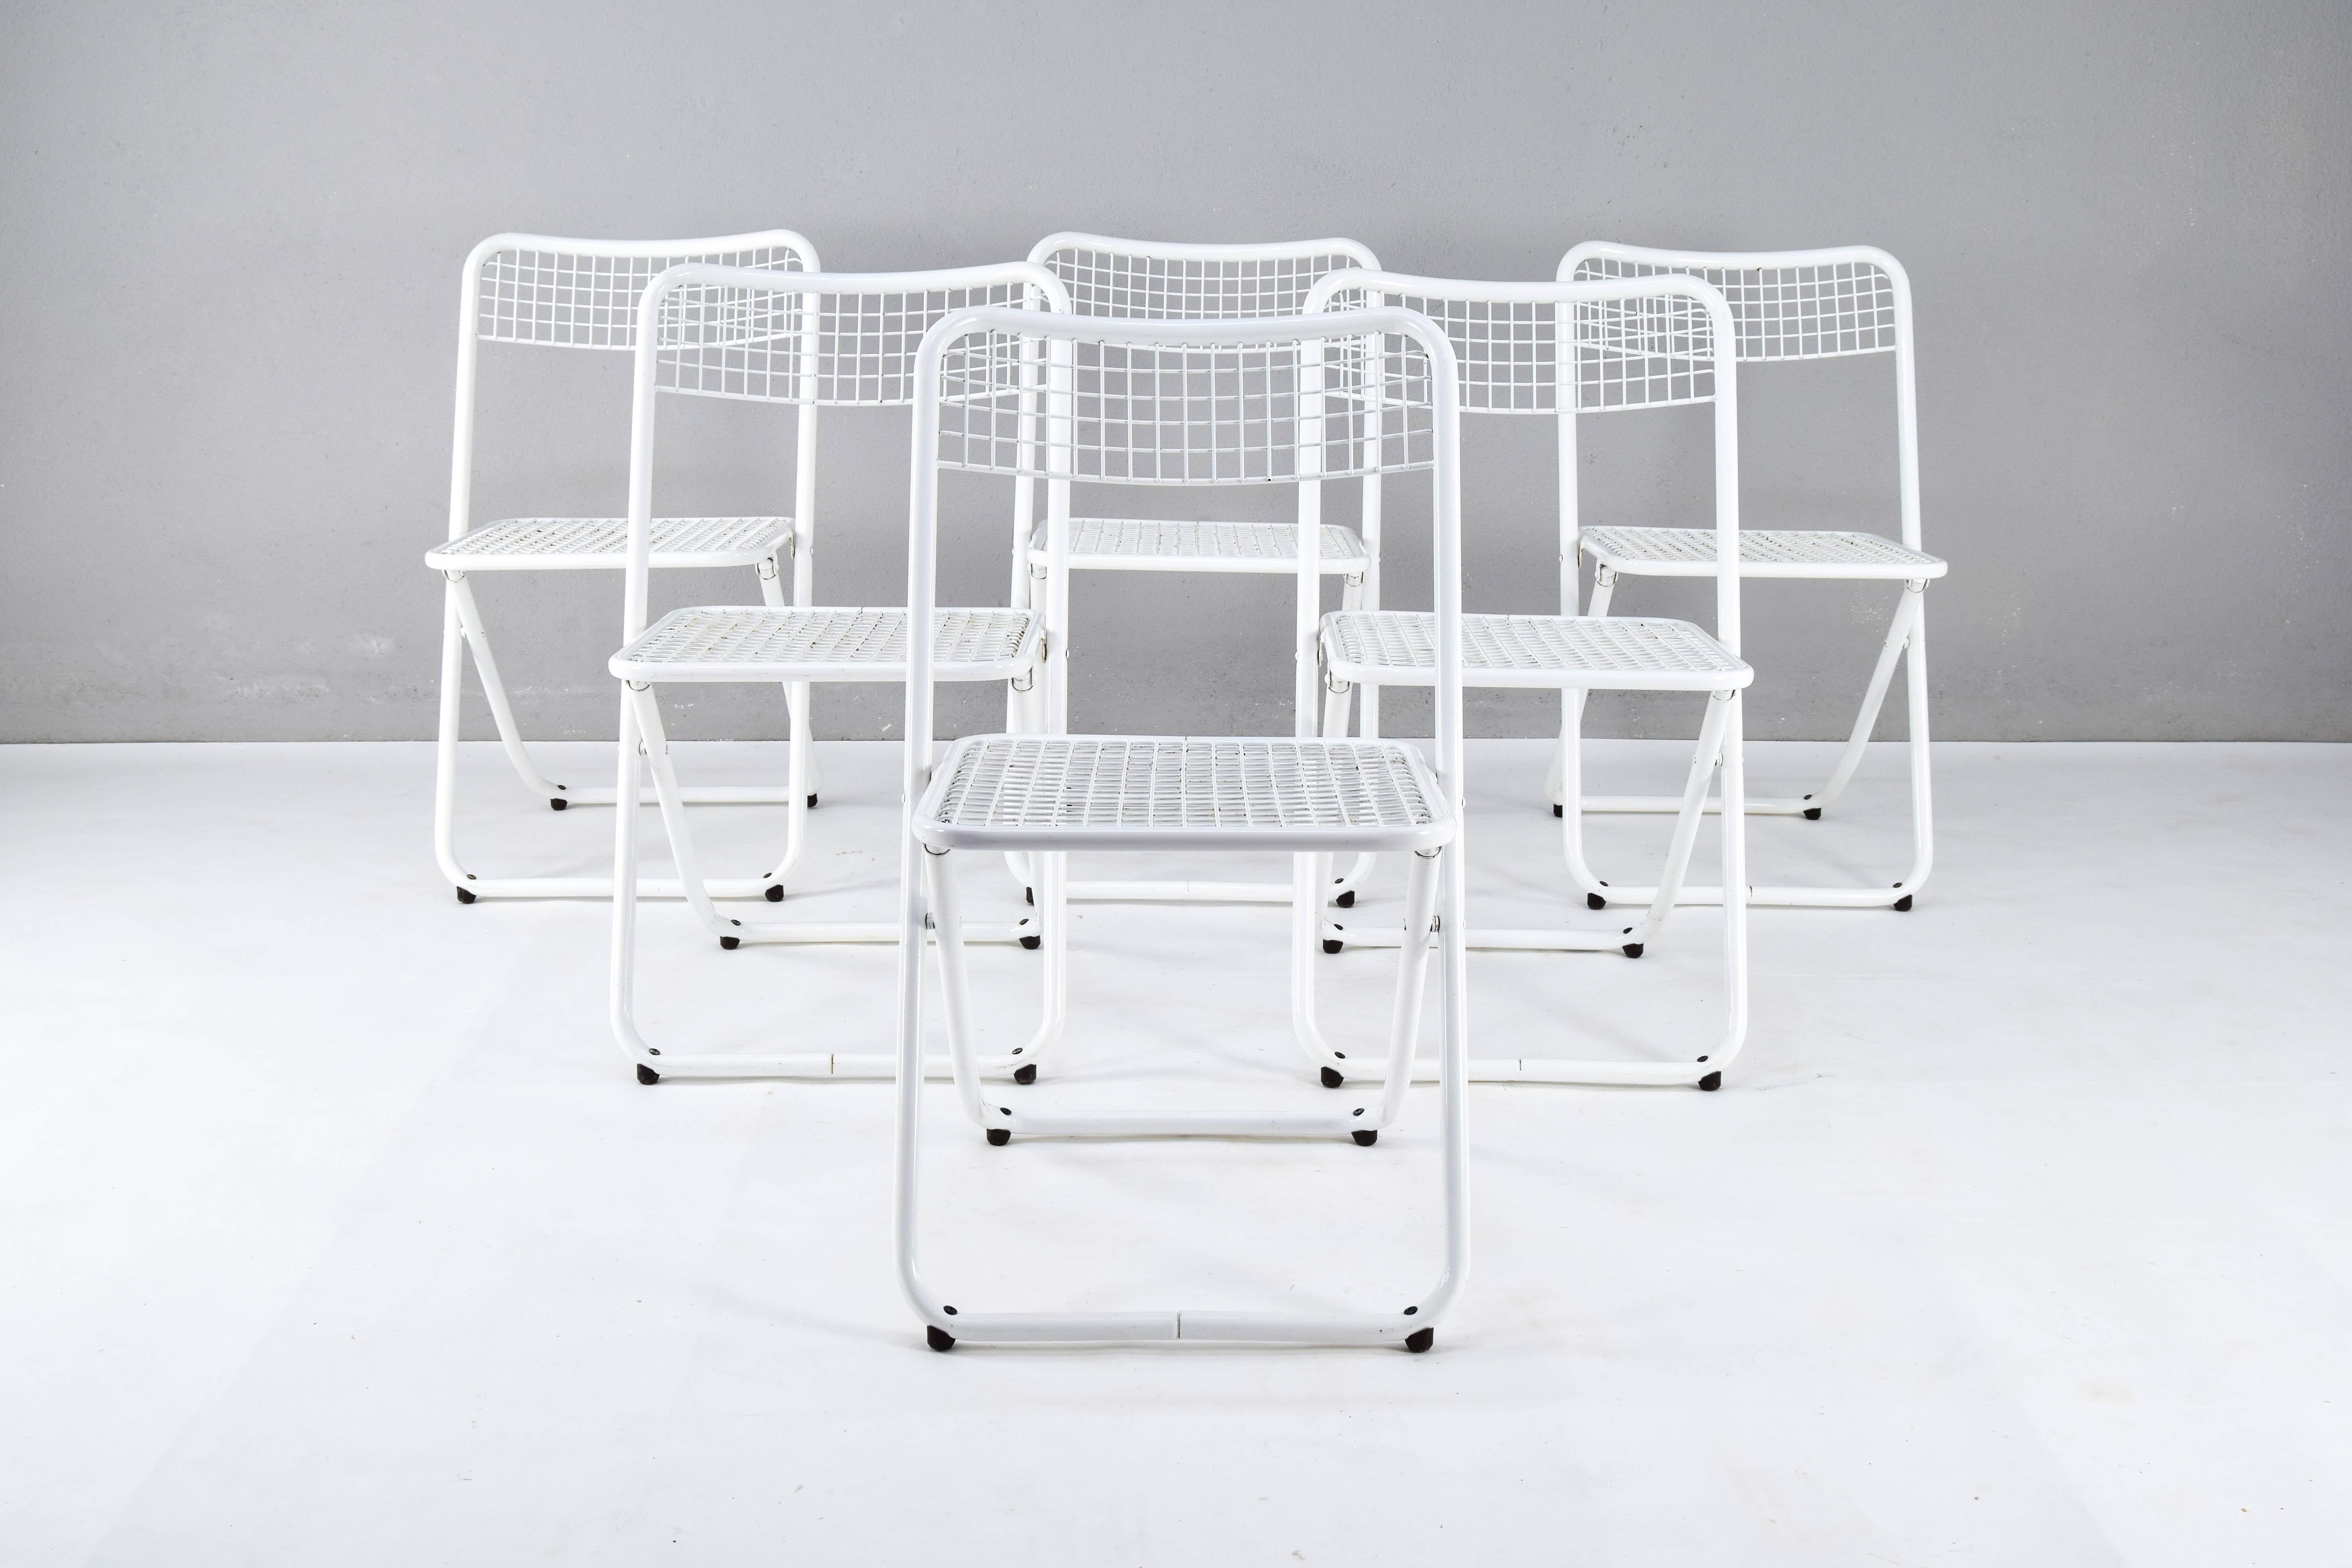 Set of 6 Mid-Century Modern folding chairs designed by Federico Giner in the 1970s and produced by his century-old company Federico Giner, in Valencia, Spain.
Federico Giner, together with his two brothers, led the third generation of a family